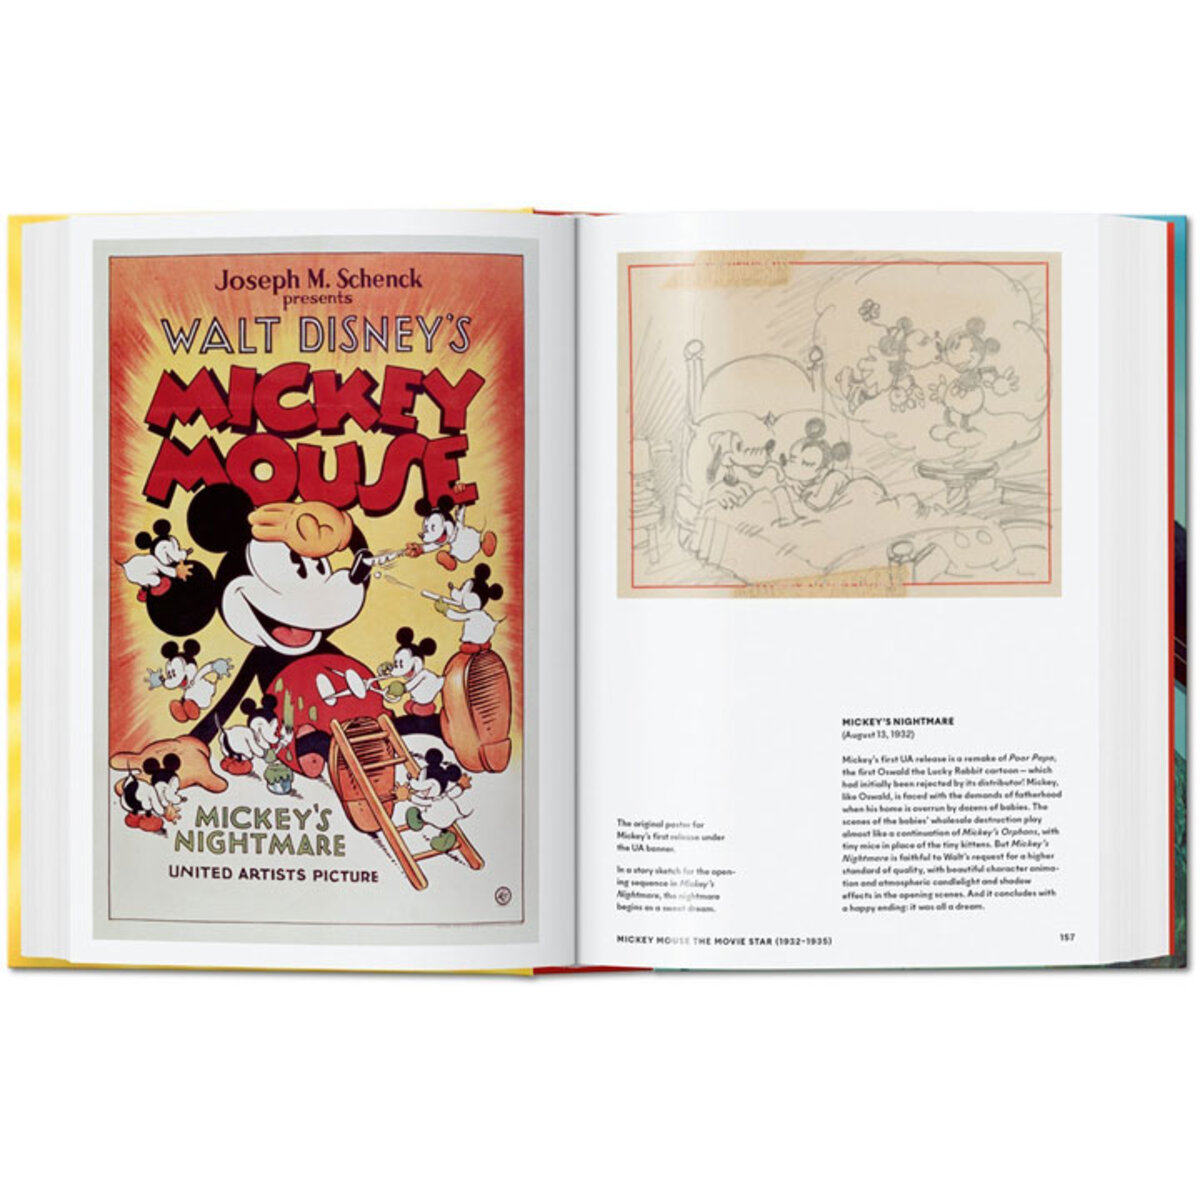 Taschen 40th Edition Assortment: Marvel Age of Comics Or Mickey Mouse Ultimate History